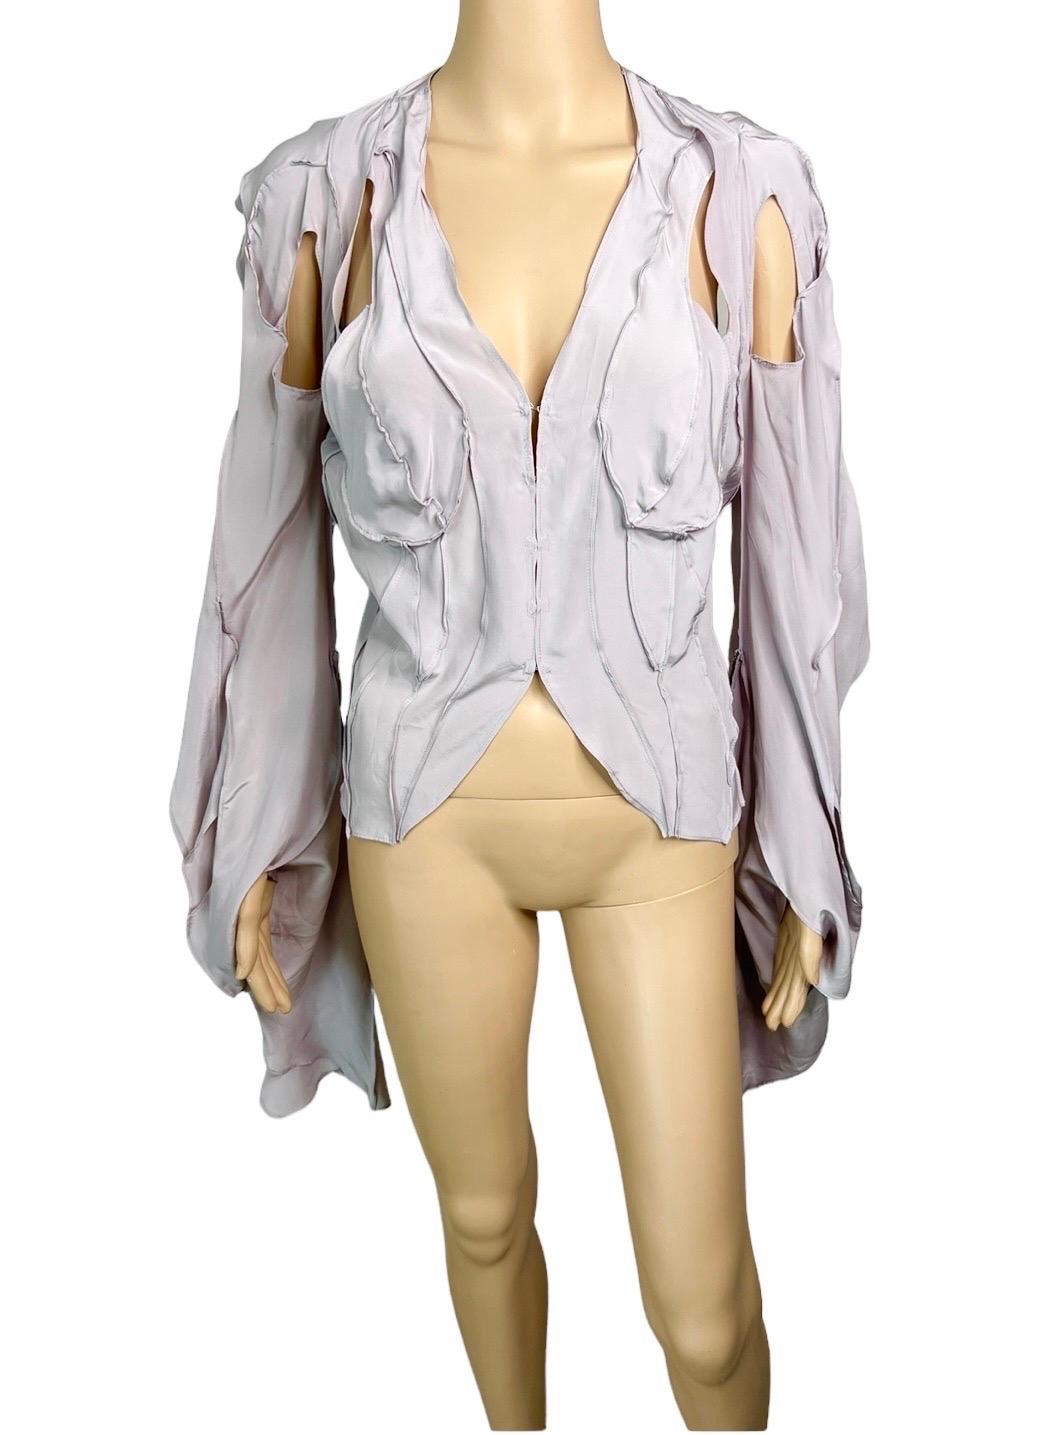 Tom Ford for Yves Saint Laurent YSL S/S 2003 Runway Cutout Shirt Blouse Top For Sale 3